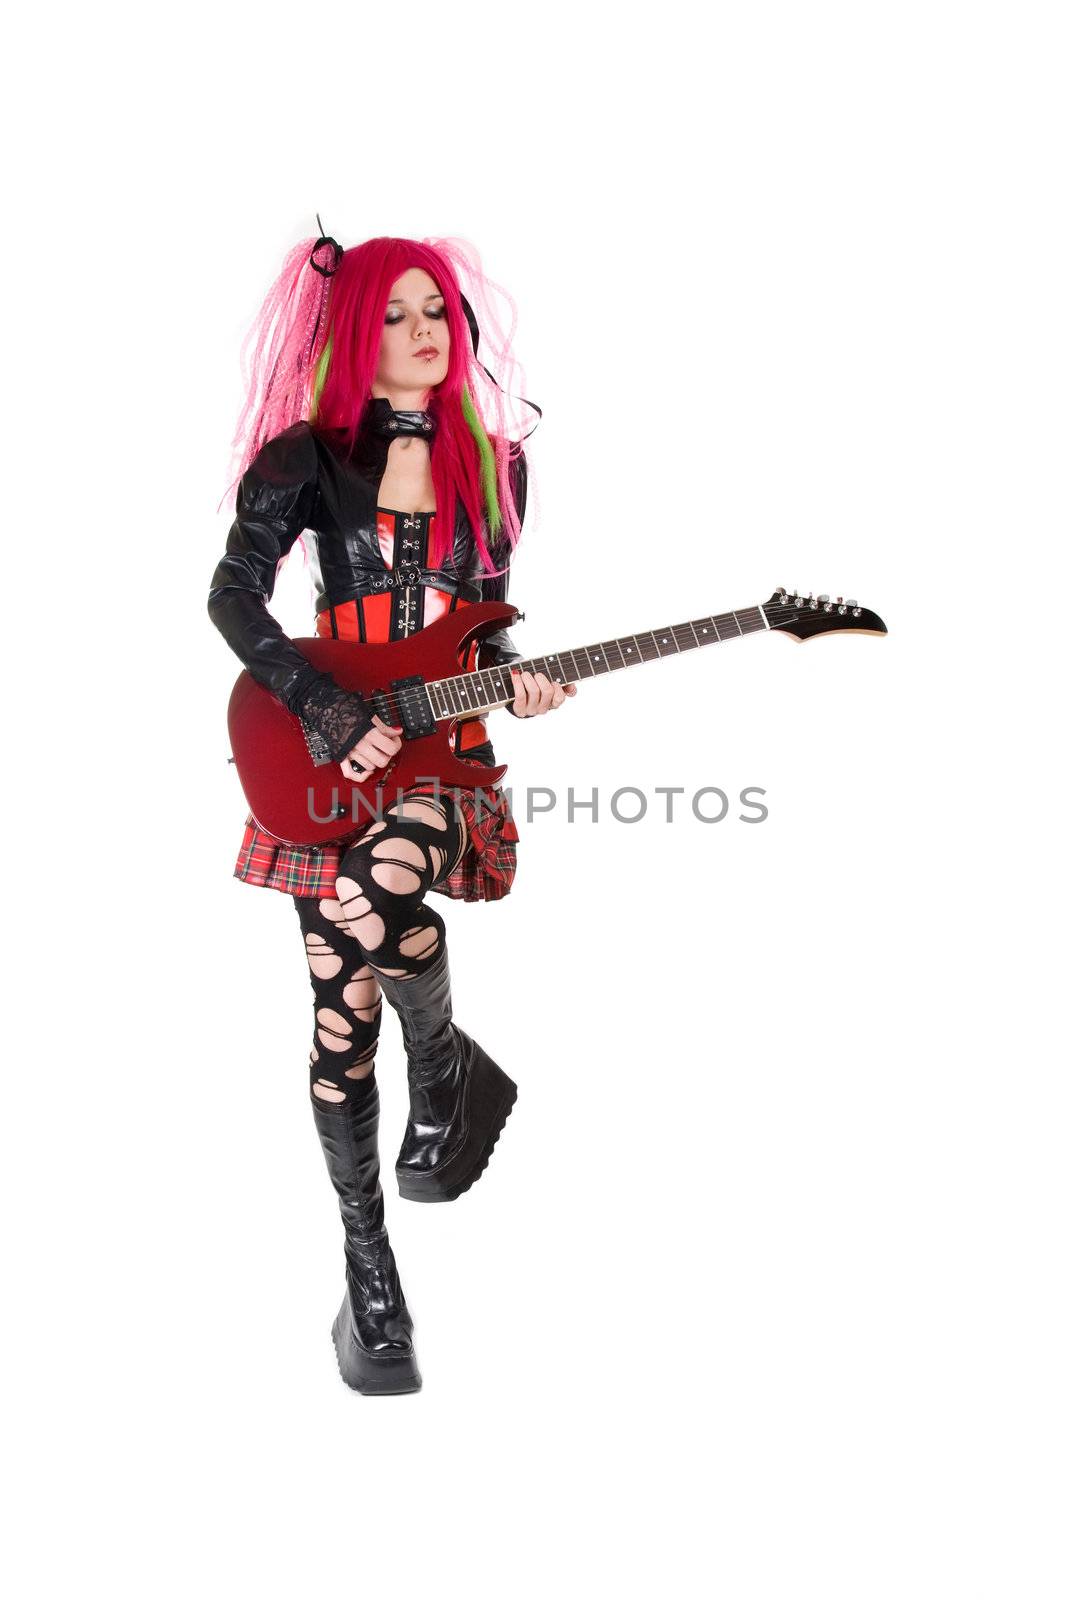 Gothic girl playing guitar, isolated on white background 